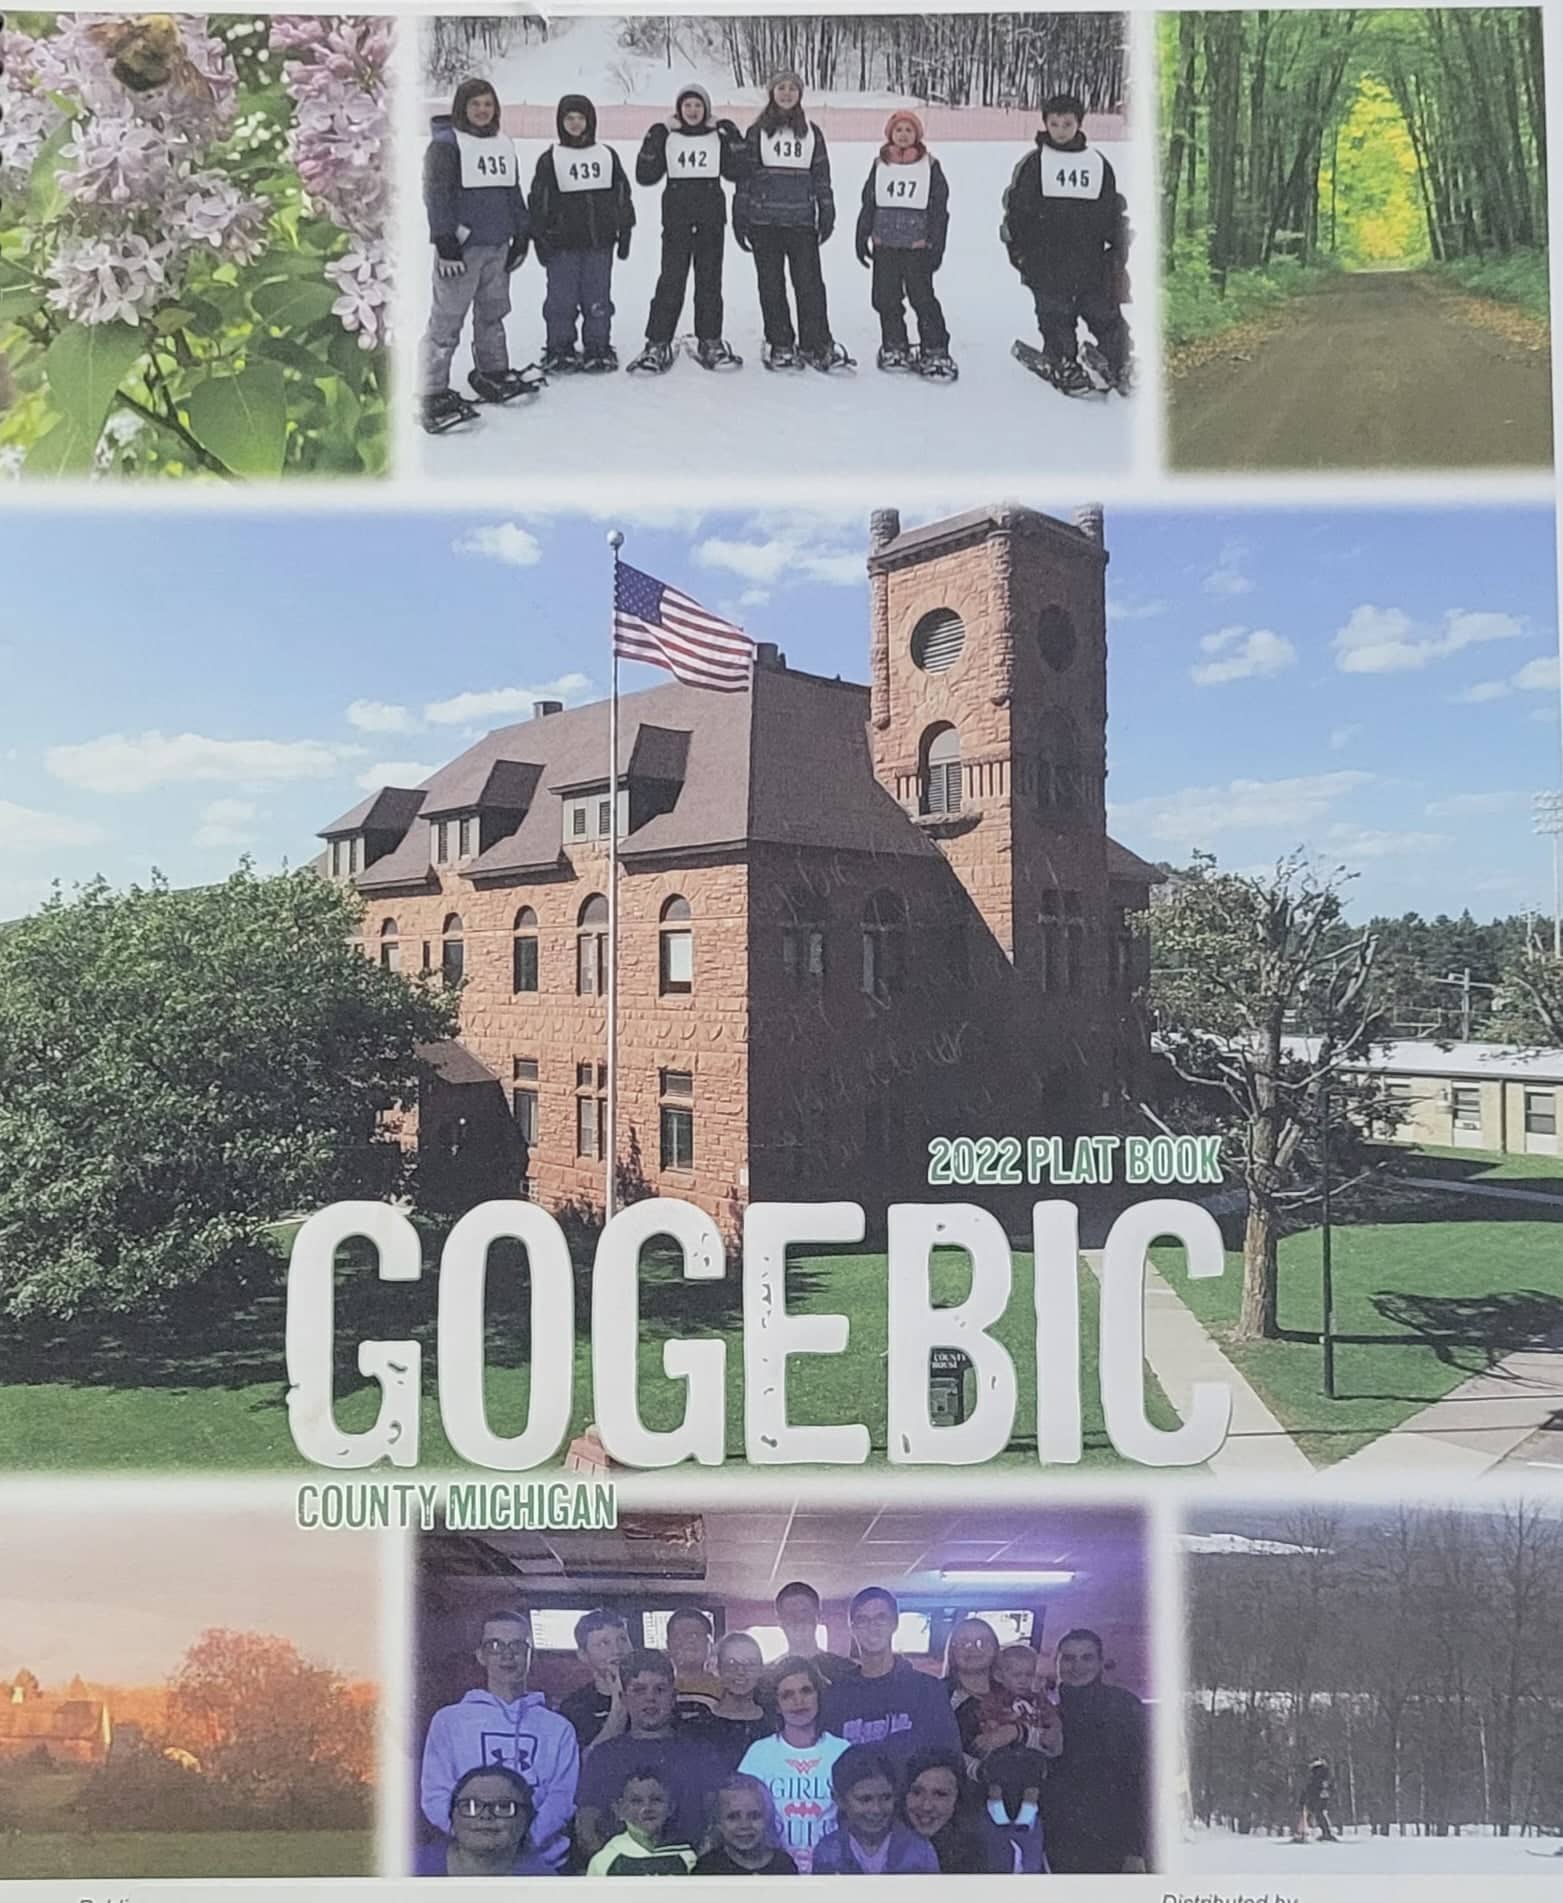 Front cover of the 2022 Plat Book for Gogebic County